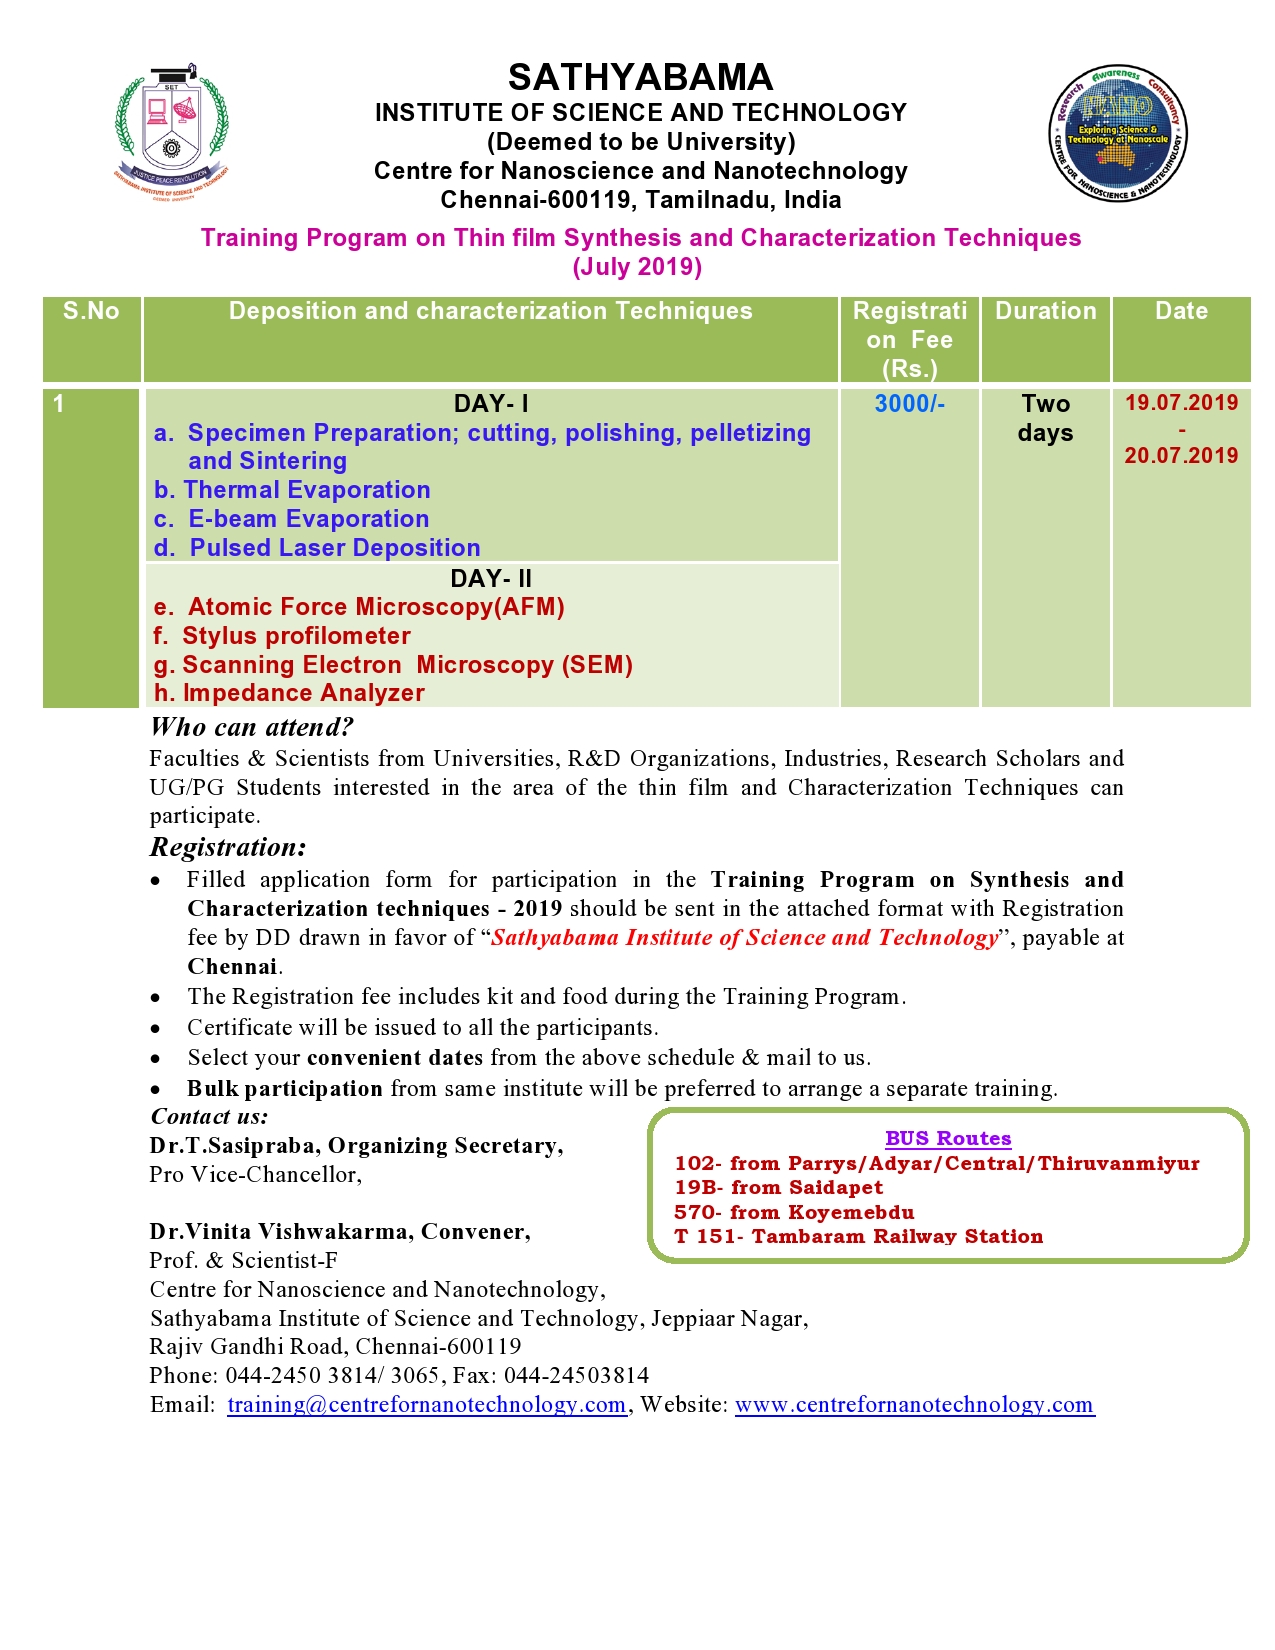 Training Program on Thin film Synthesis and Characterization Techniques 2019